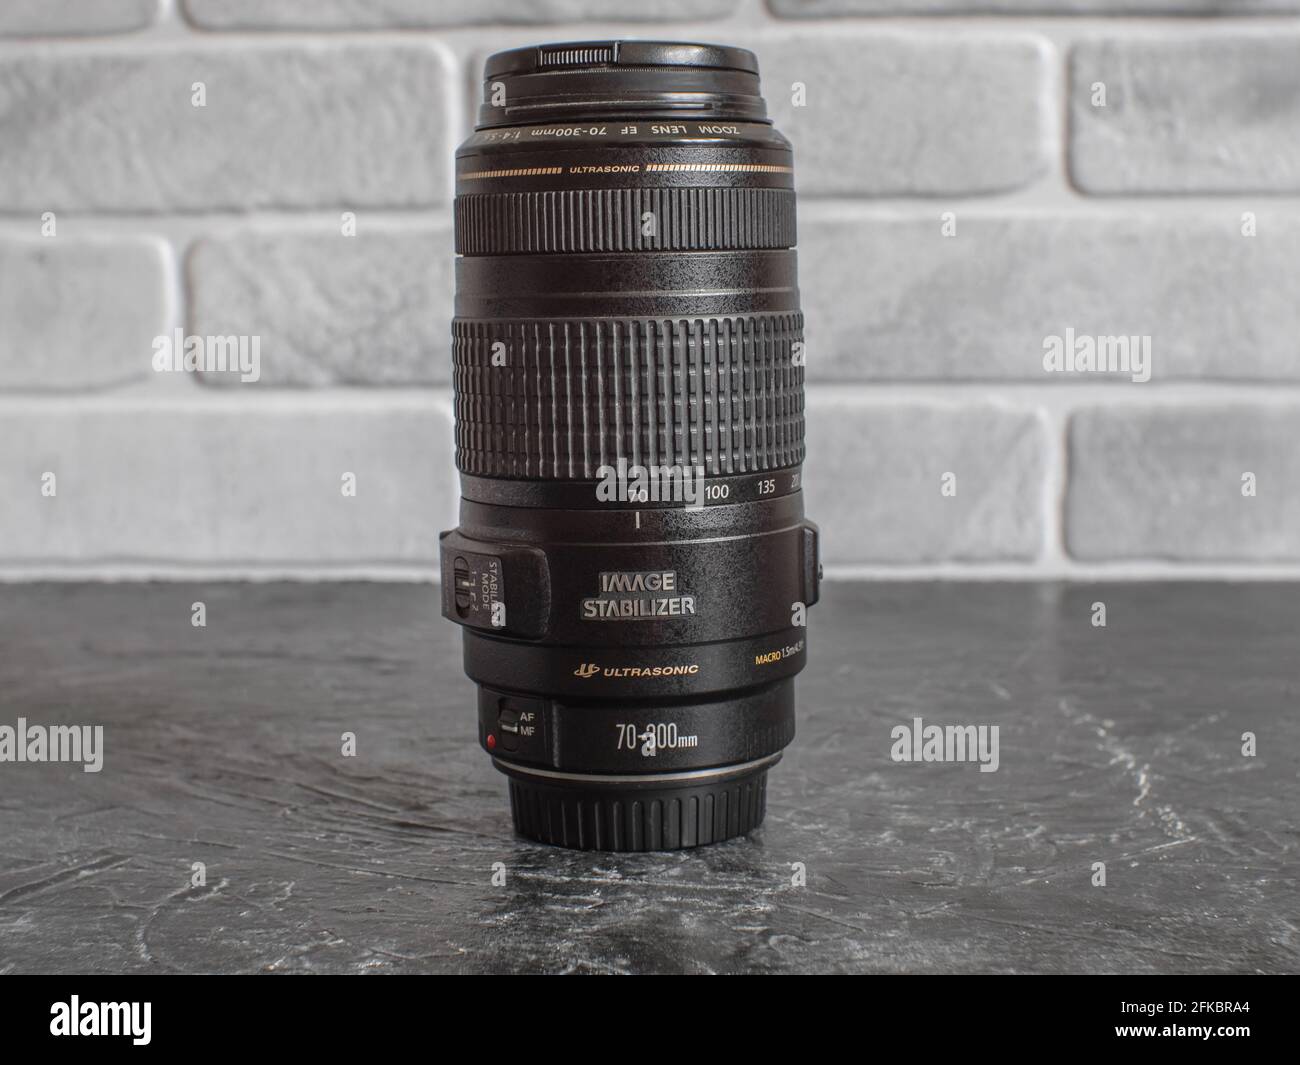 Russia, Krasnodar - April 2, 2021: Canon zoom lens with a focal length of 70-300mm F4-5.6 for the EF mount Stock Photo